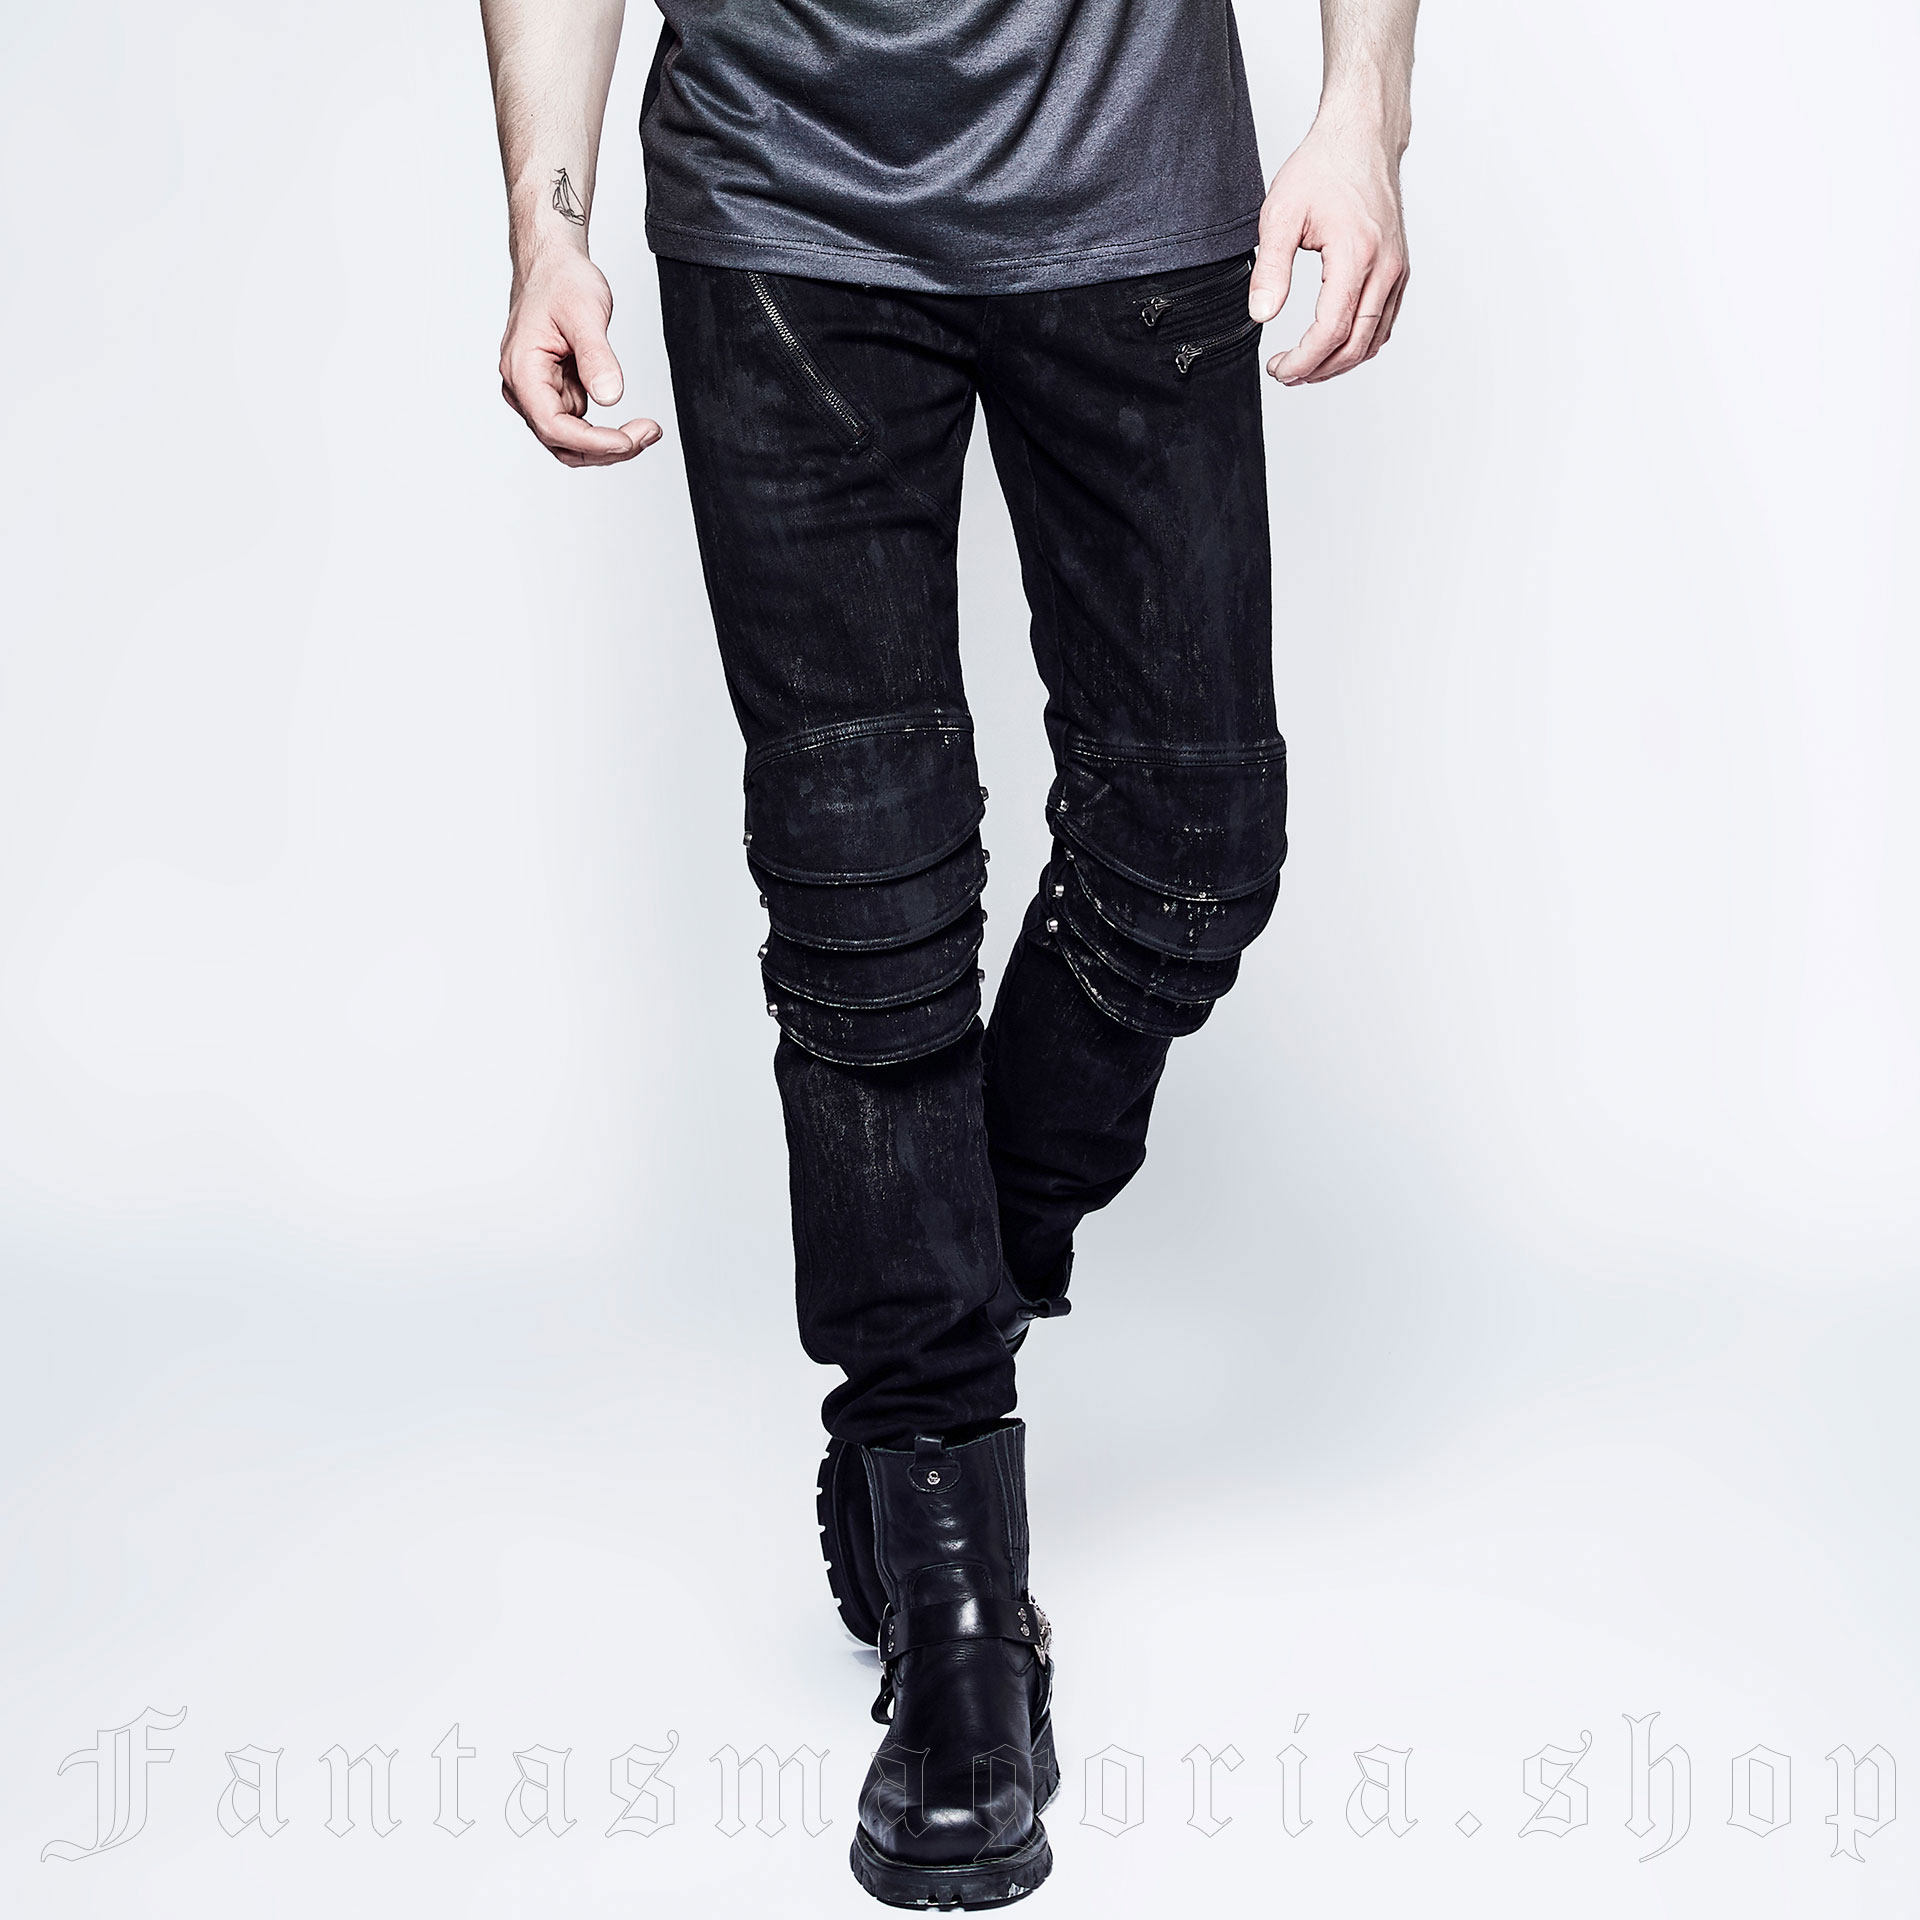 The Smog Trousers by Punk Rave brand